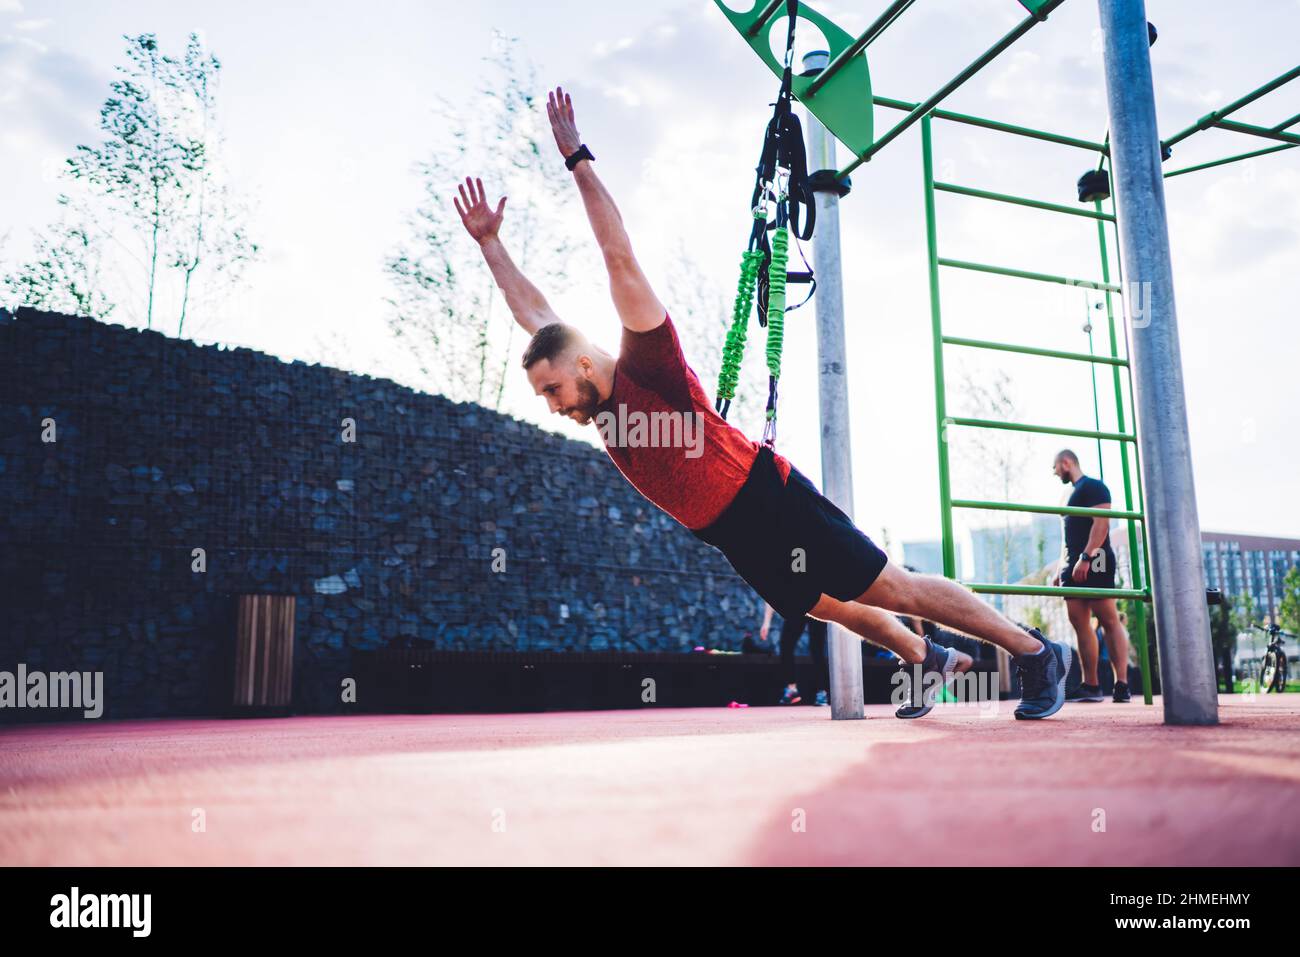 Strong sportsman exercising on sports ground Stock Photo